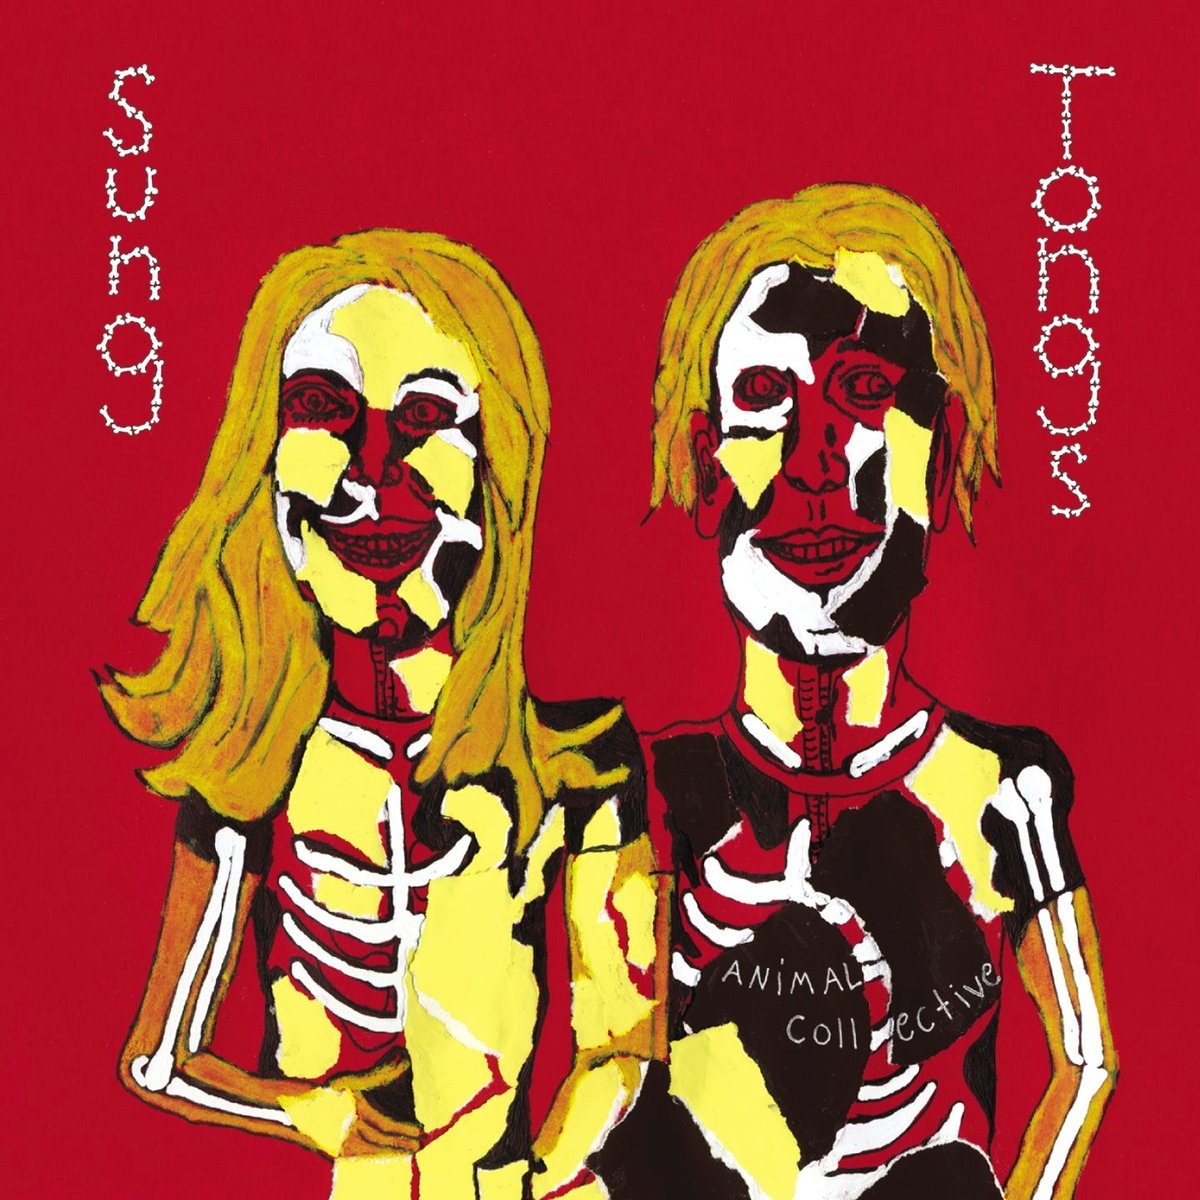 Sung Tongs (2021 Domino Reissue)